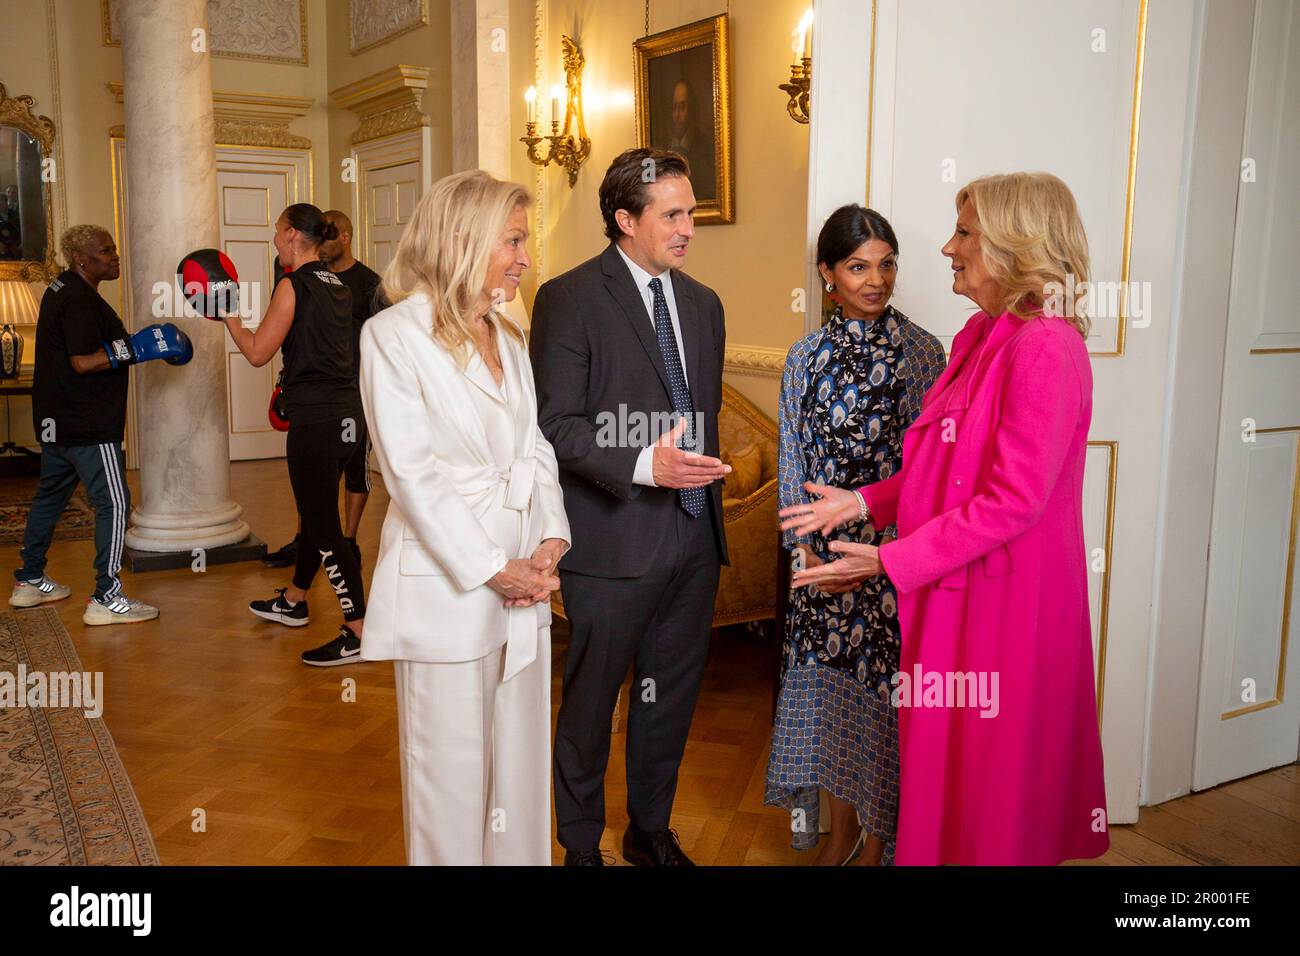 London, United Kingdom. 05th May, 2023. U.S first lady Jill Biden, right, and Akshata Murty, 2nd right, wife of British Prime Minister Rishi Sunak, chat with the U.S. Ambassador Jane Hartley, left, and UK Minister for Veterans Affairs Johnny Mercer, center, during an event honoring a veterans boxing charity at 10 Downing Street, May 5, 2023 in London, United Kingdom. Credit: Erin Scott/White House Photo/Alamy Live News Stock Photo